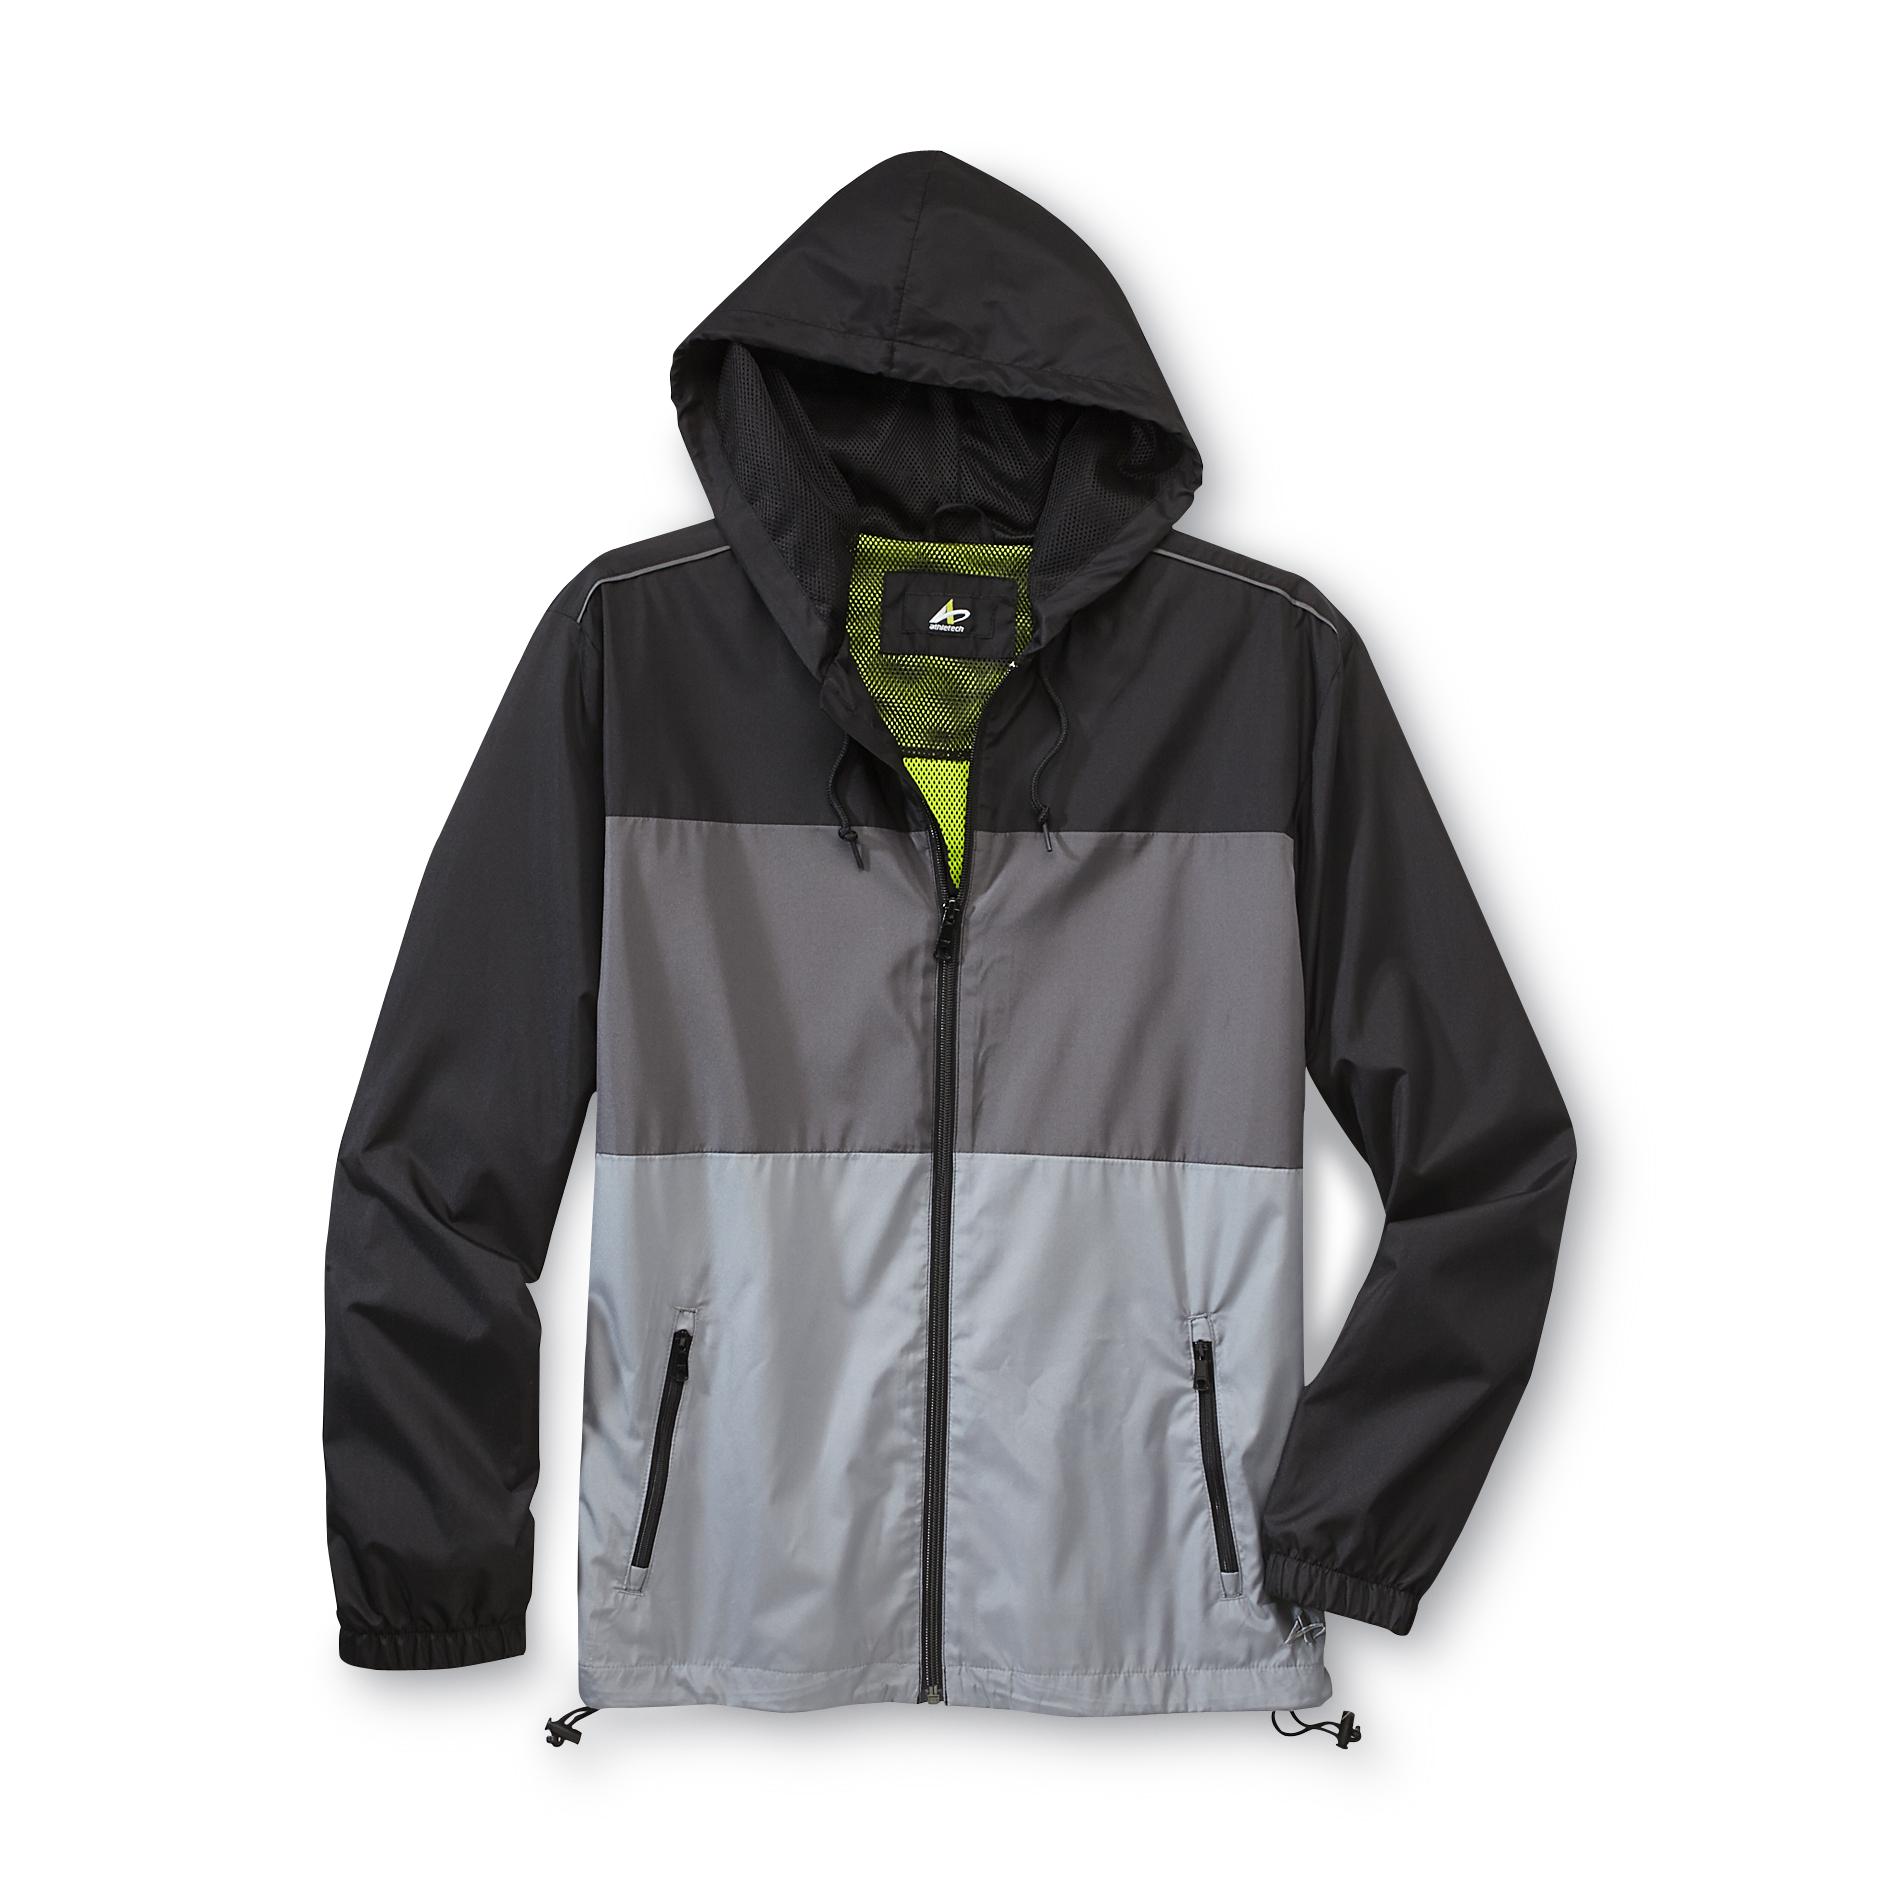 Athletech Men's Hooded Athletic Jacket - Colorblock